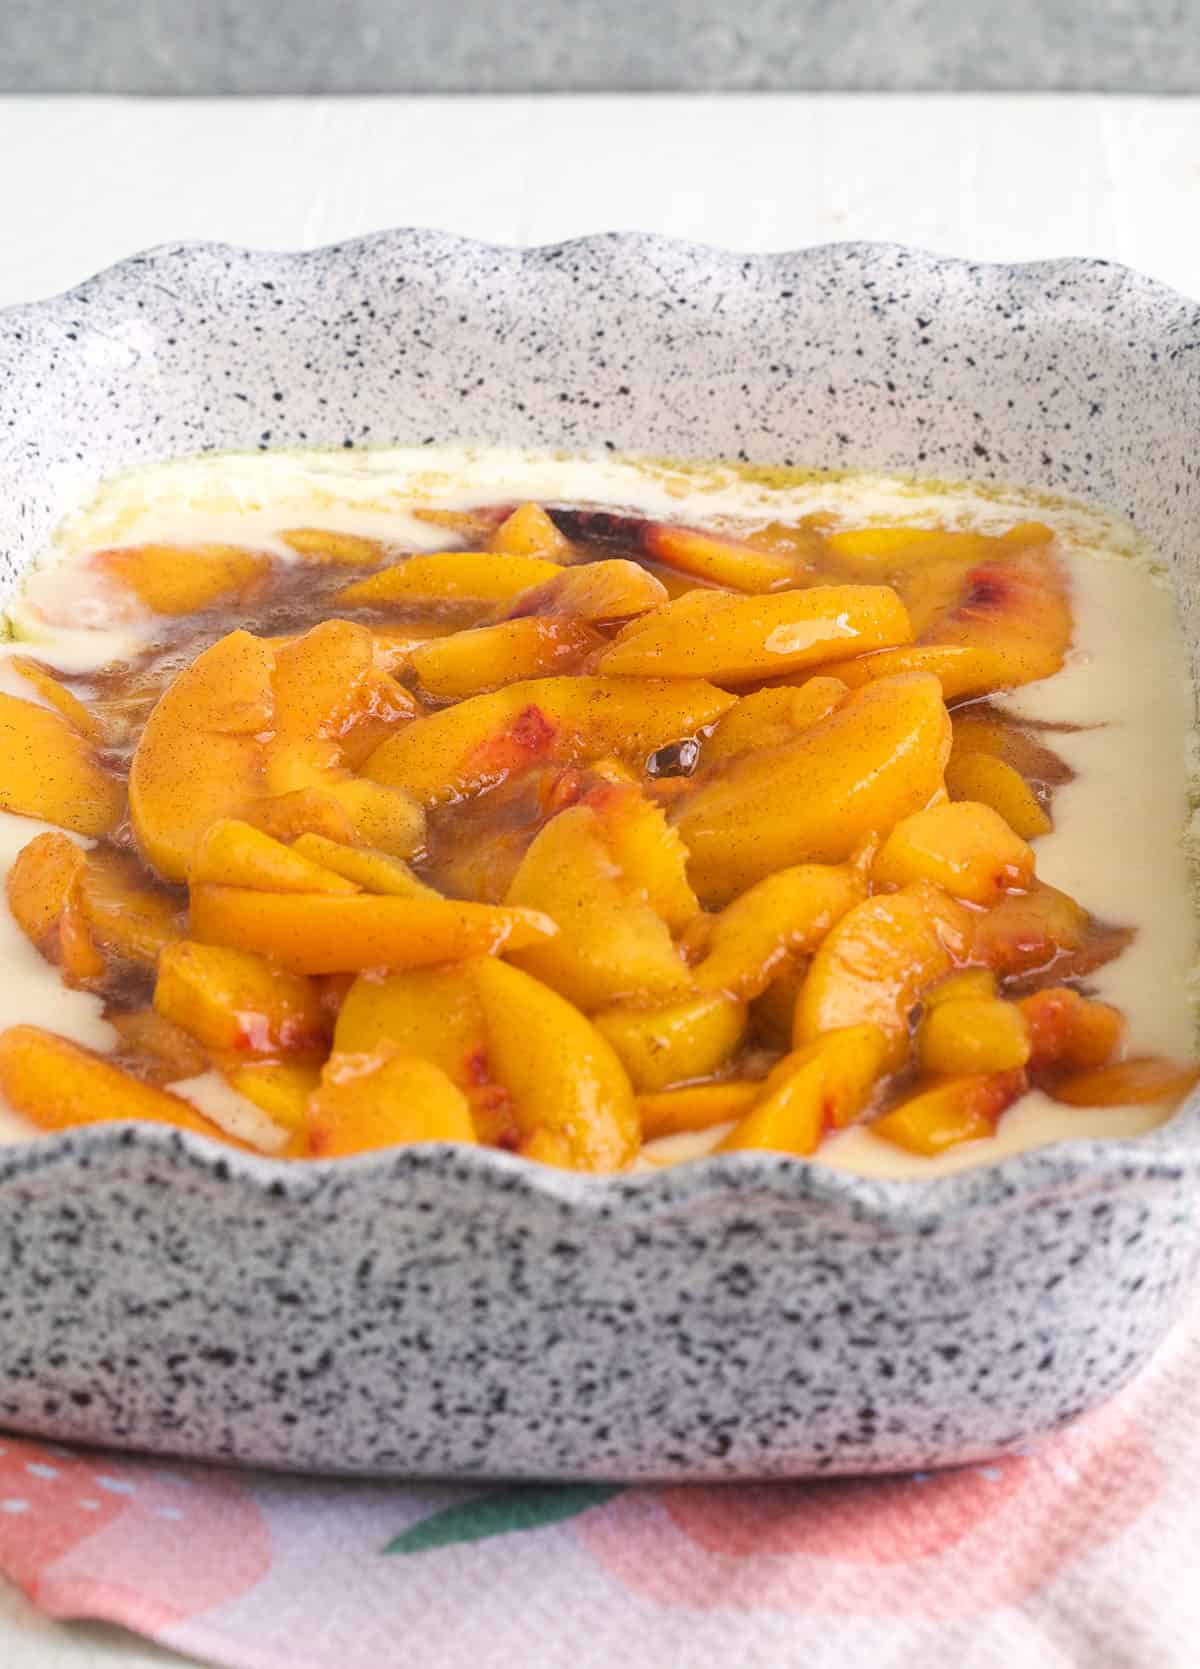 Peaches are placed in the middle of a casserole dish and are surrounded by batter. 